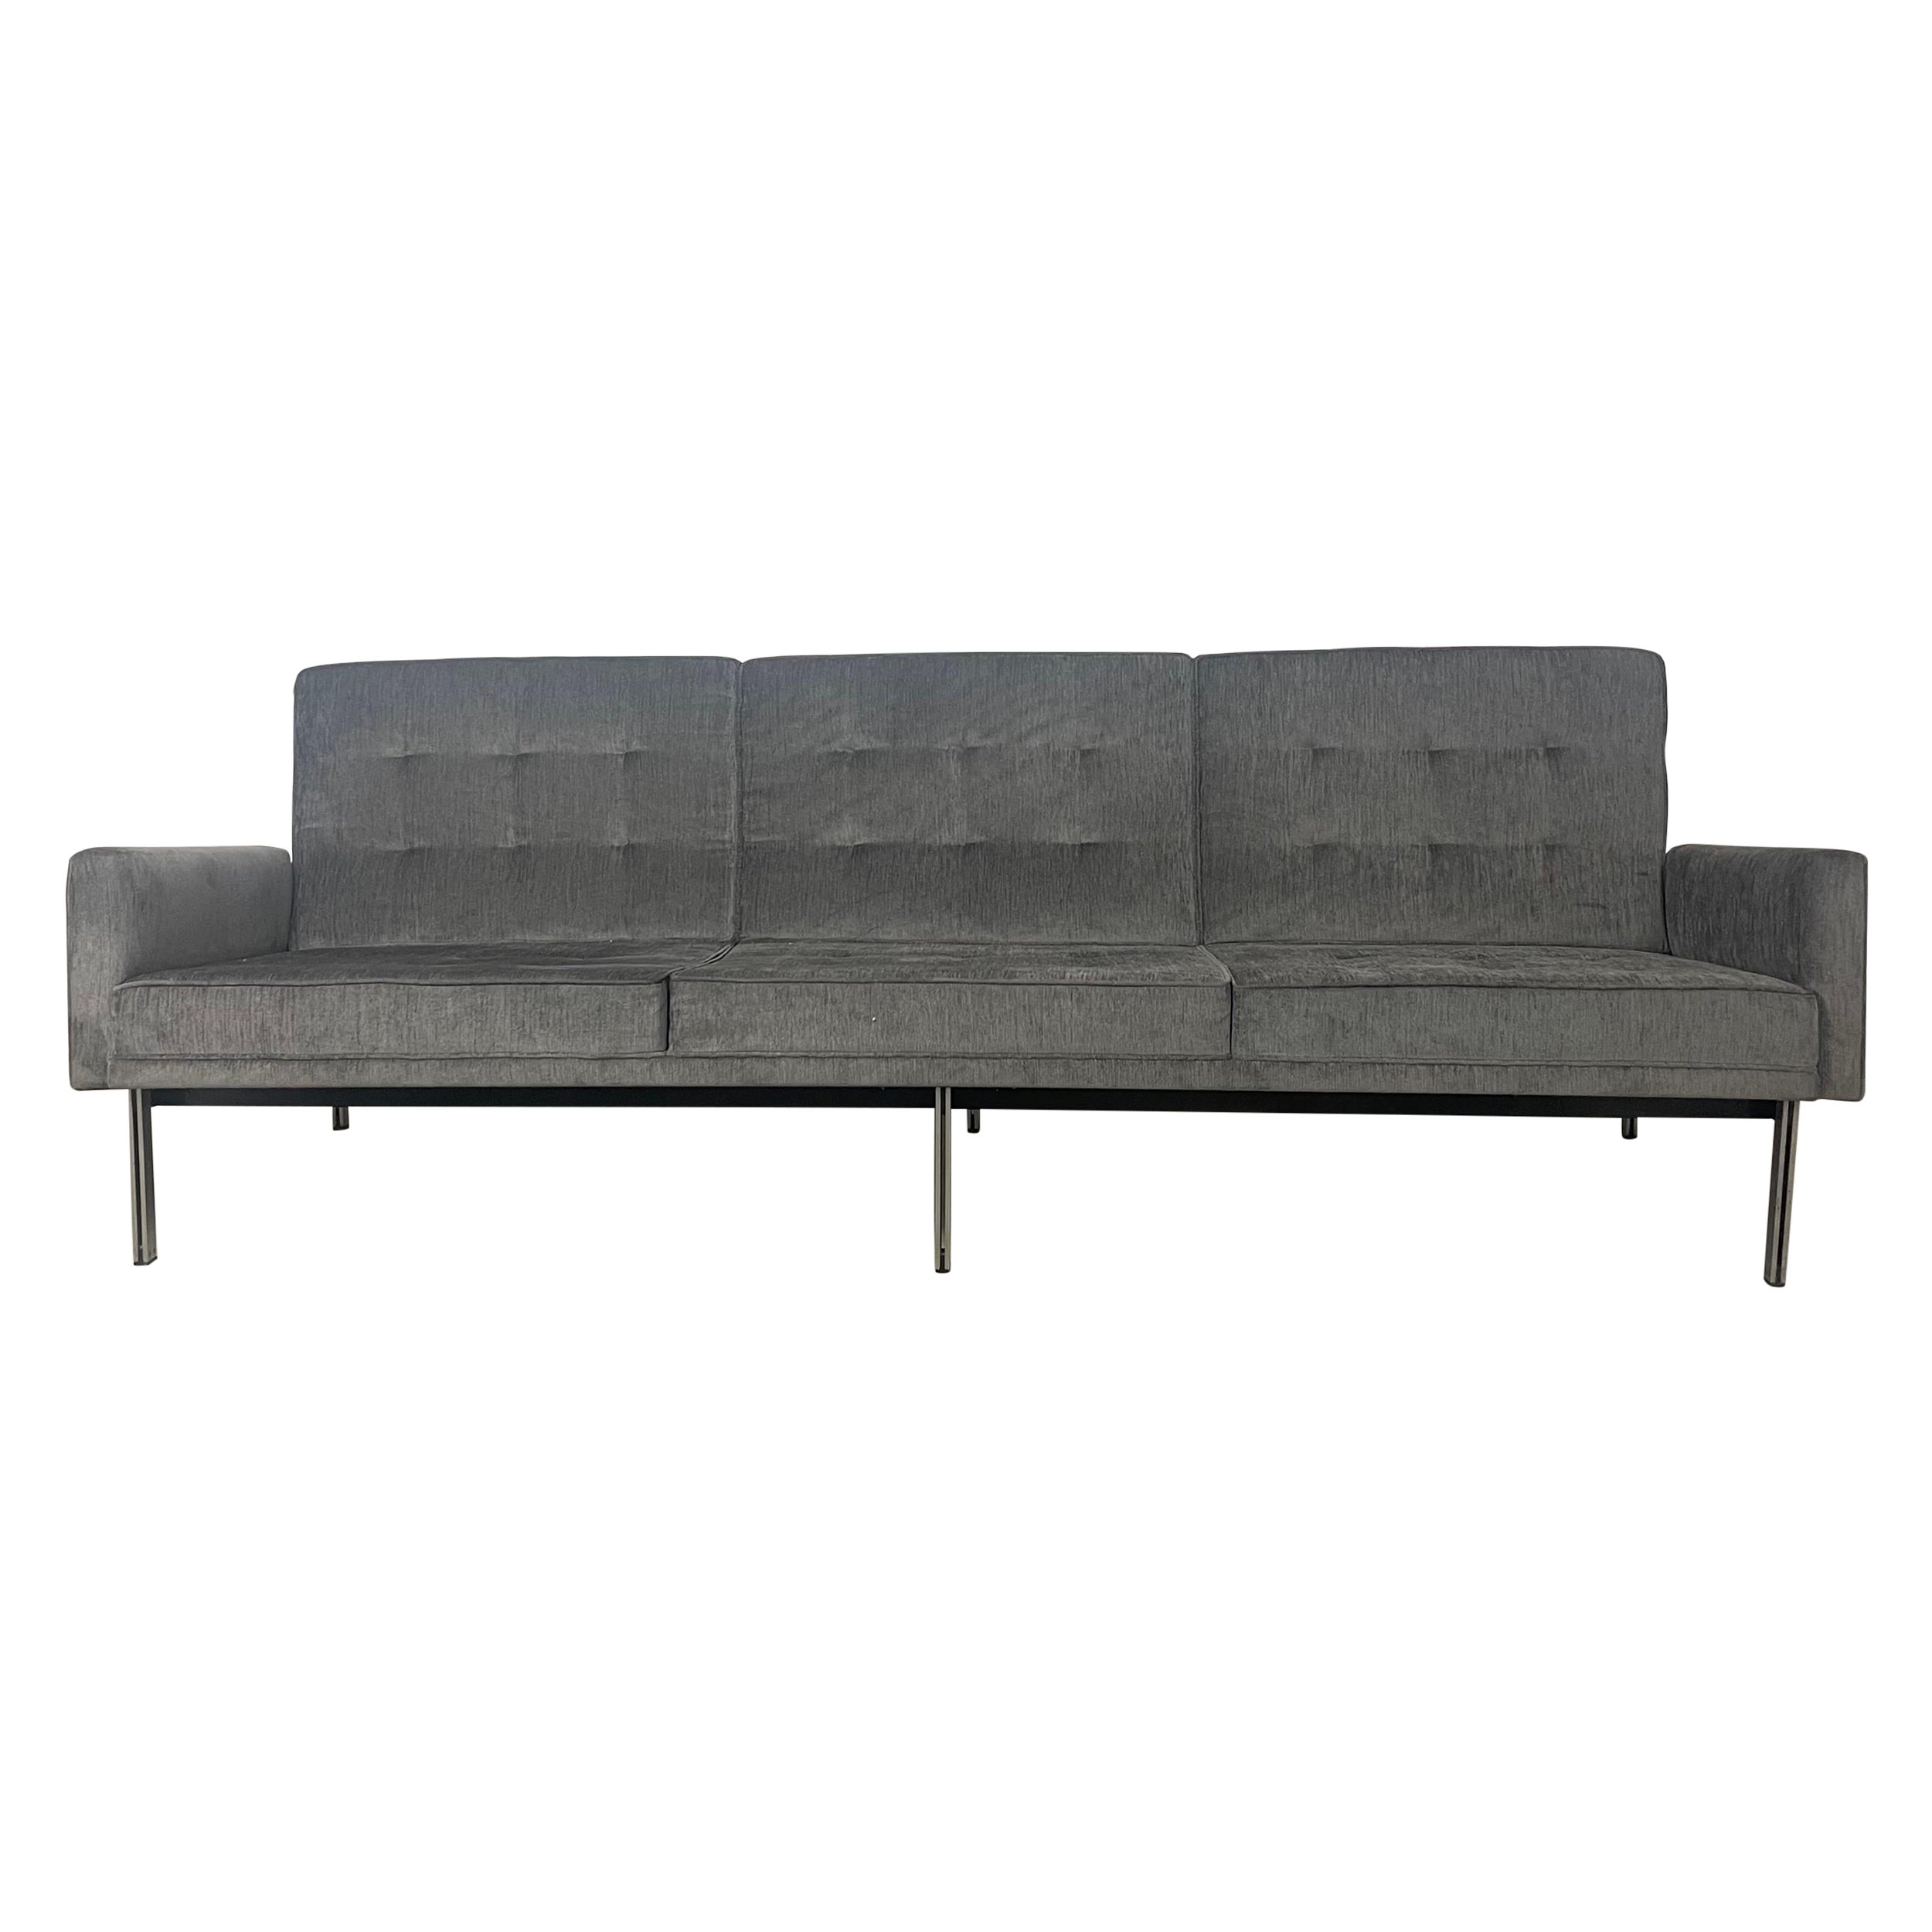 Parallel Bar Sofa Model 53 By